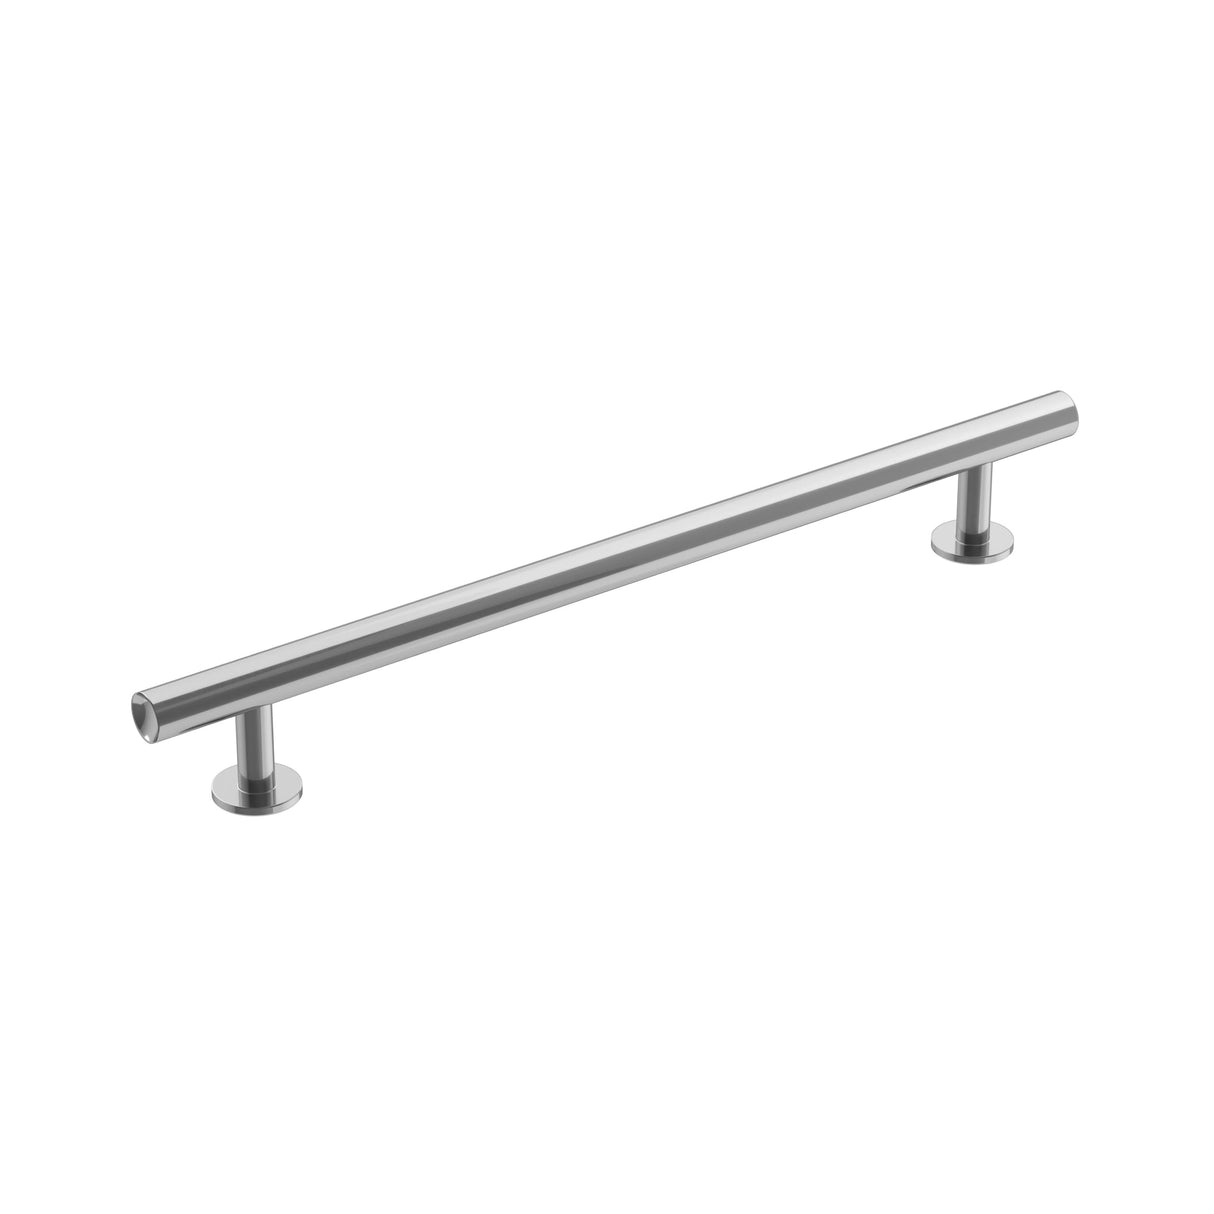 Amerock Cabinet Pull Polished Chrome 7-9/16 inch (192 mm) Center-to-Center Radius 1 Pack Drawer Pull Cabinet Handle Cabinet Hardware